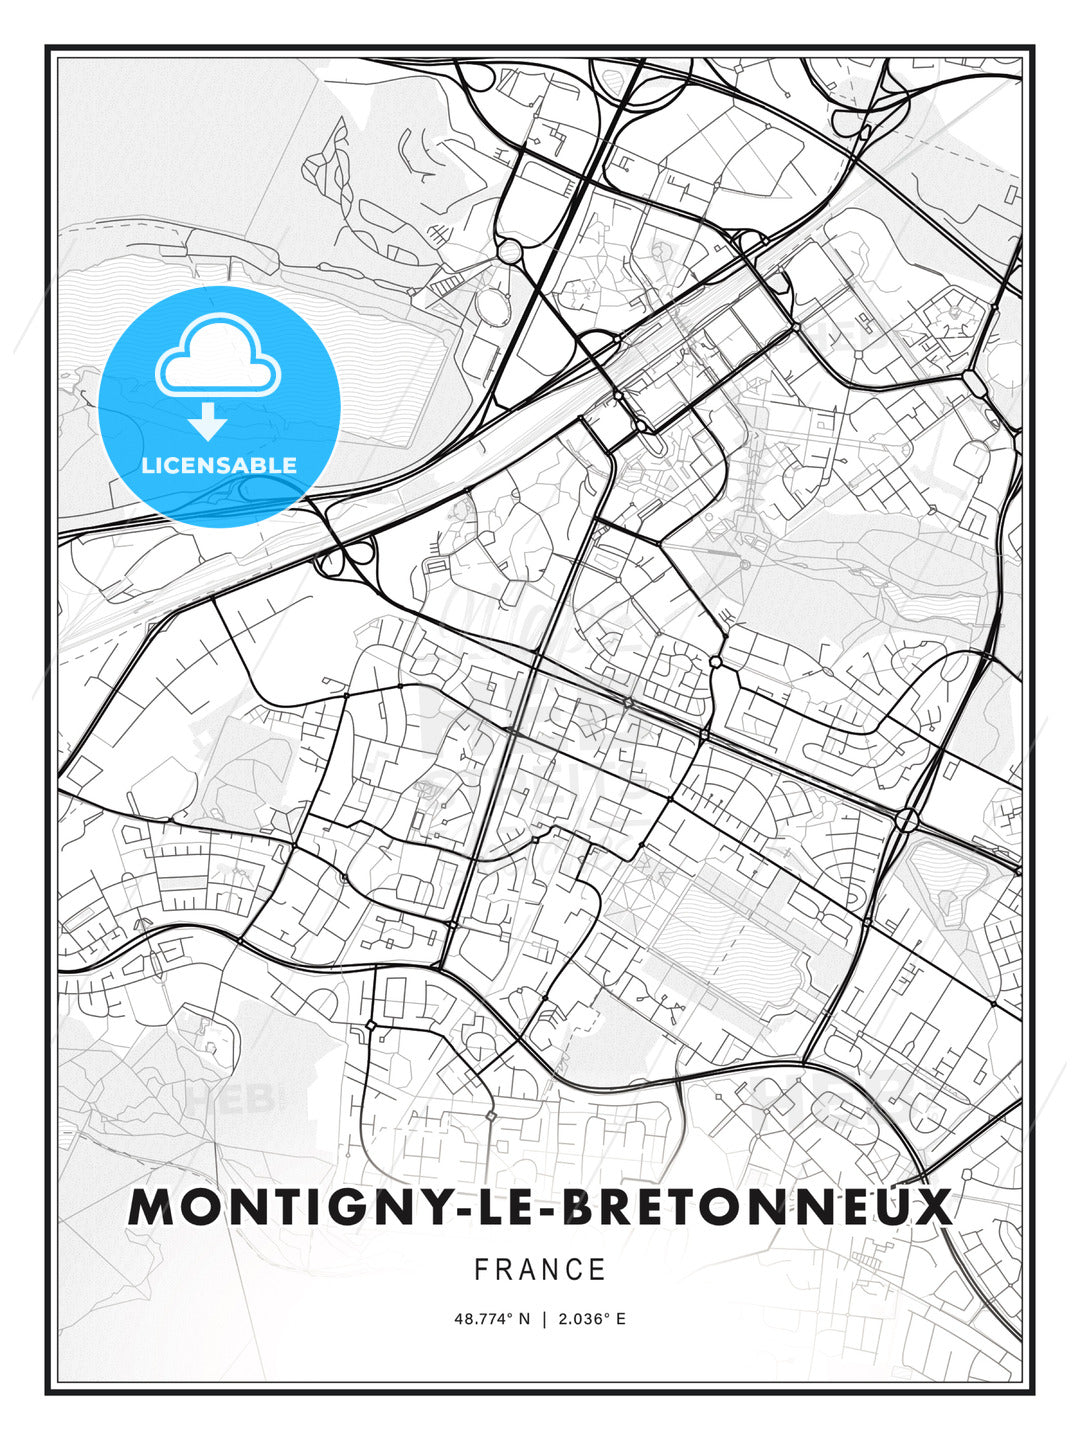 Montigny-le-Bretonneux, France, Modern Print Template in Various Formats - HEBSTREITS Sketches